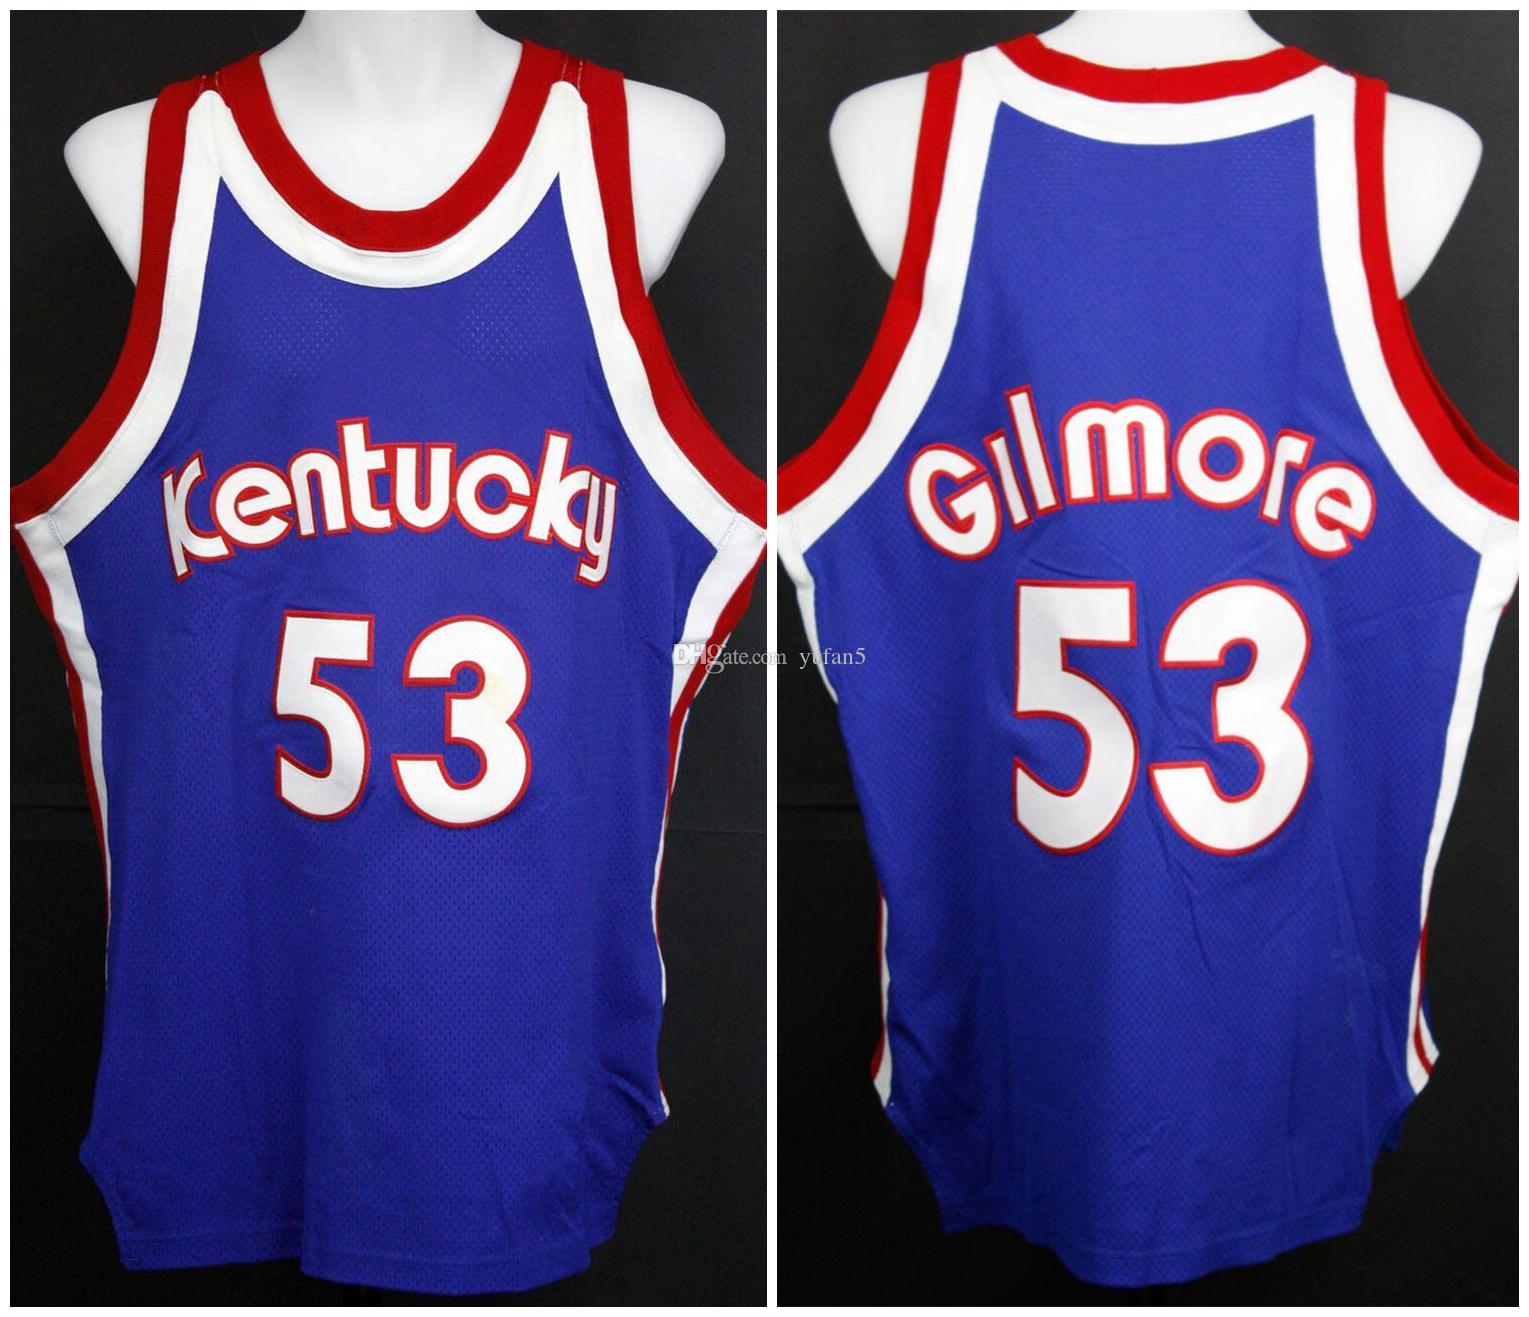 

Artis Gilmore #53 Colonels Kentucky RETRO JERSEY 1974-75 Retro Basketball Jersey Mens Stitched Custom Number Name Jerseys, As show